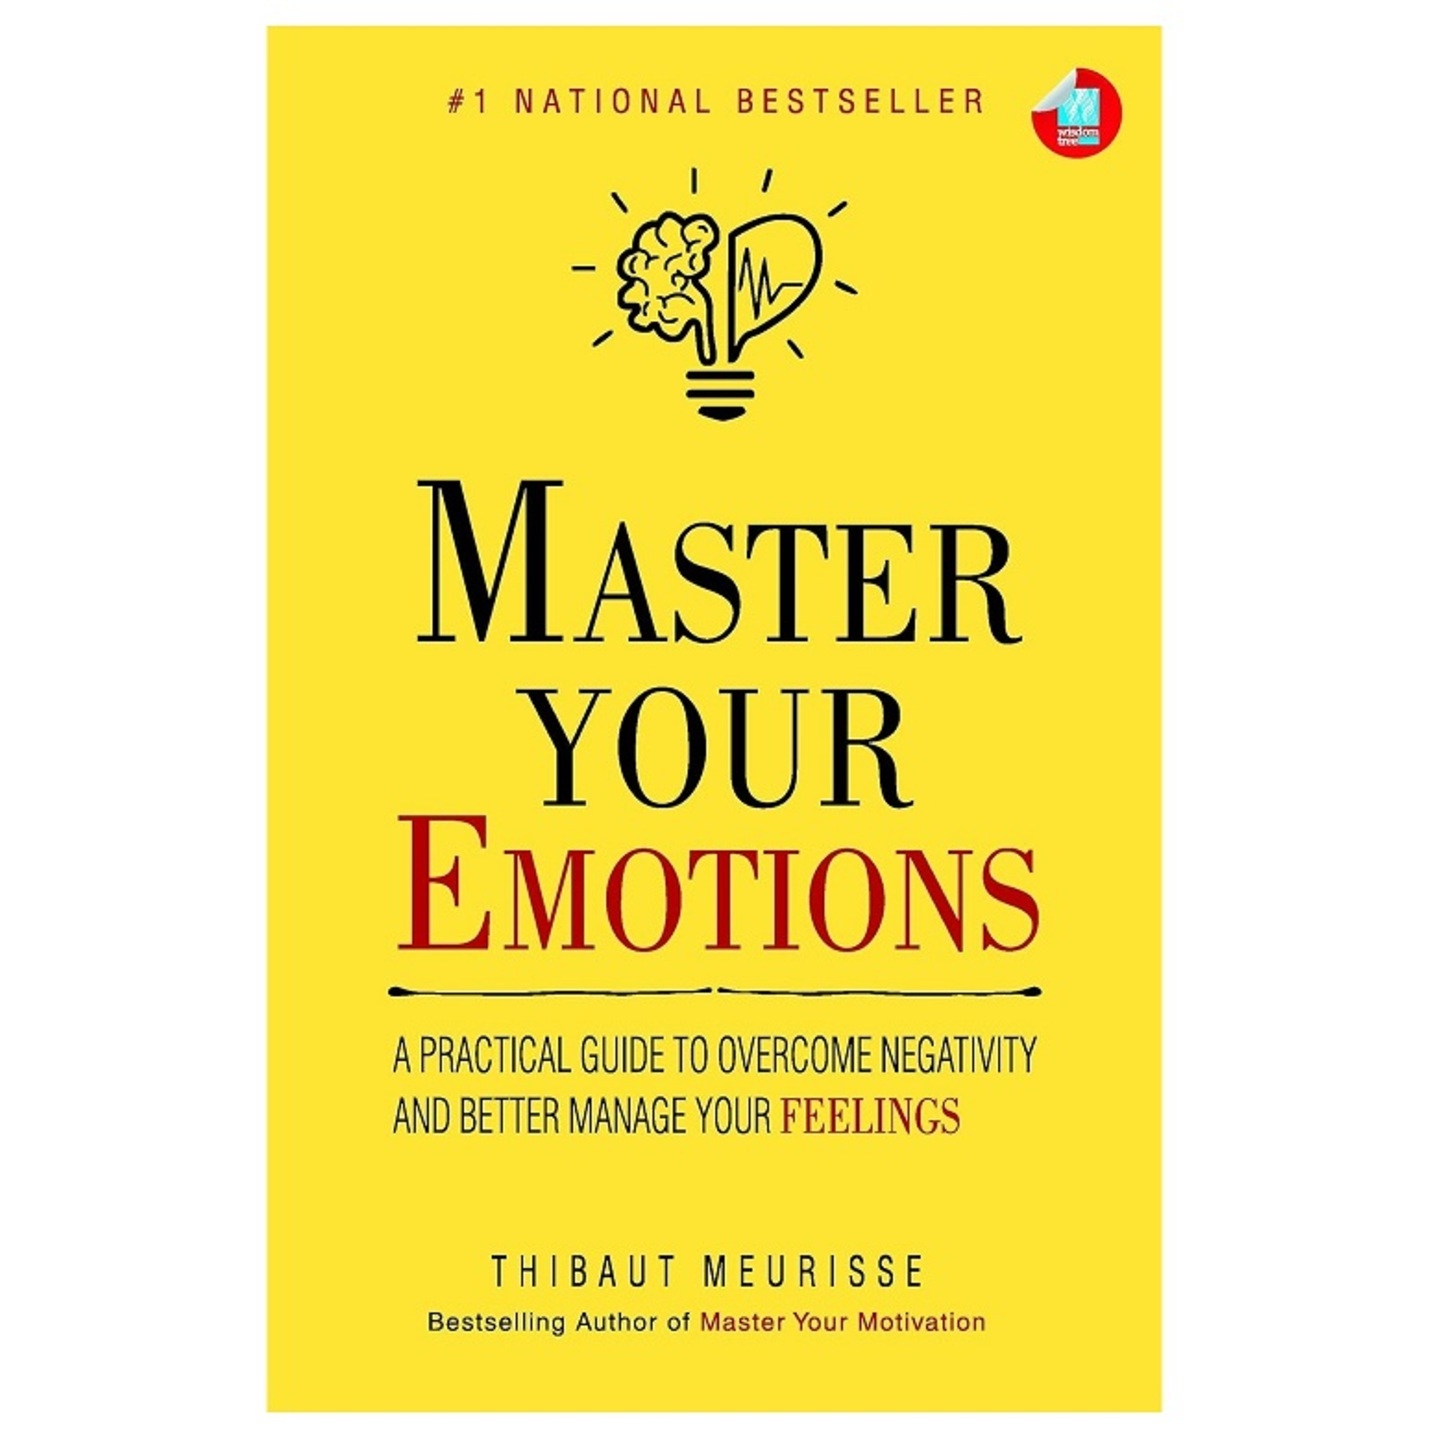 Book Master Your Emotions - A Practical Guide to Overcome Negativity